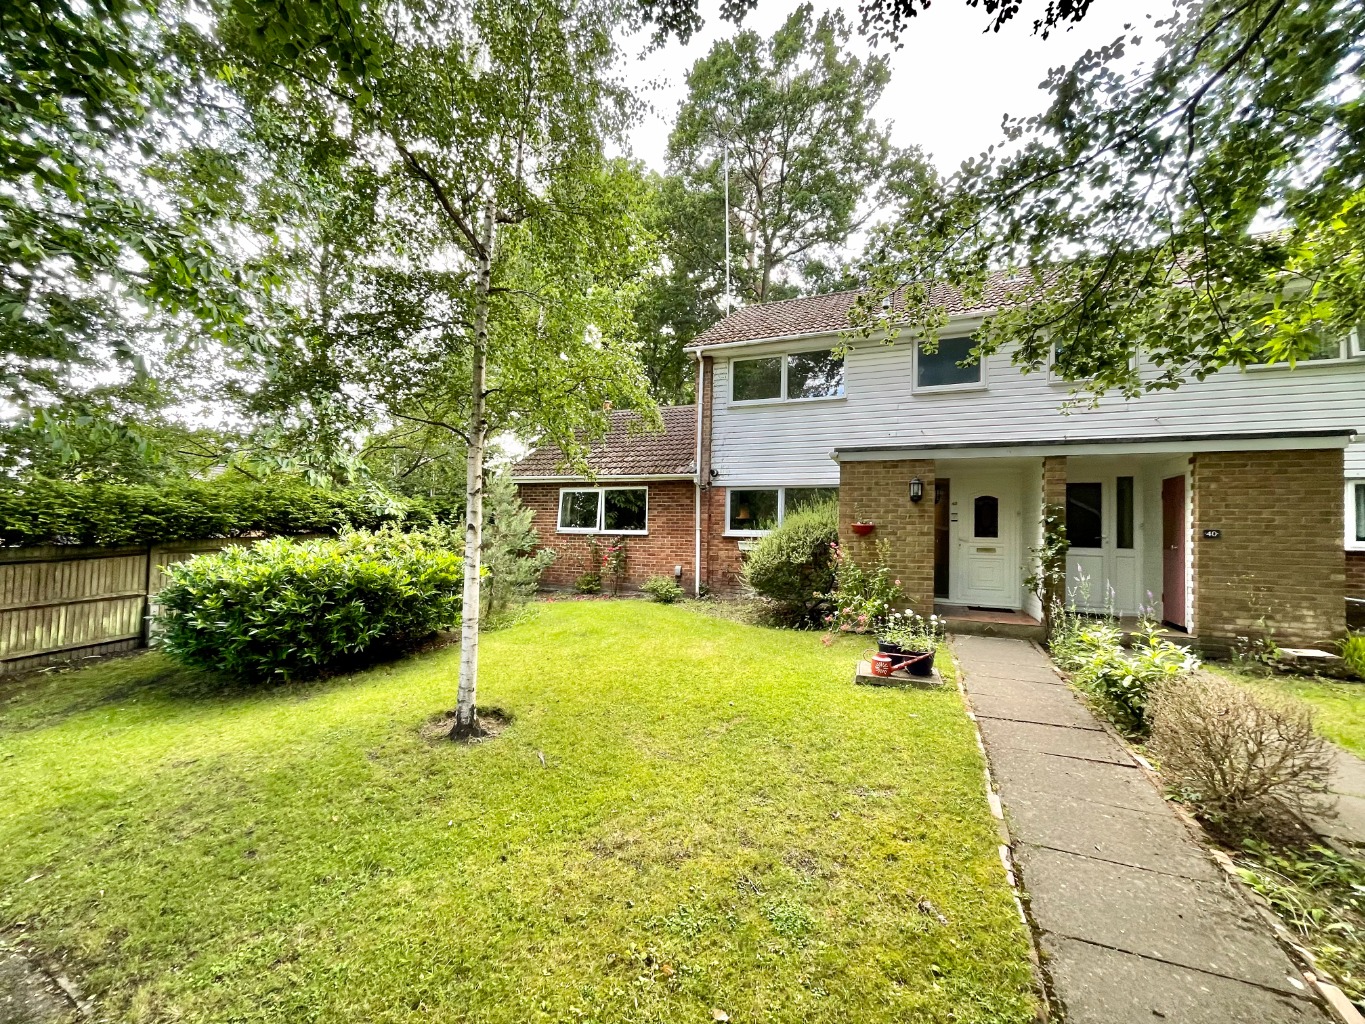 Available with no onward chain tucked away on a peaceful woodland walkway within Heatherside, is this flexible & versatile three/four bedroom family home on a large corner plot with a garage in a nearby block...